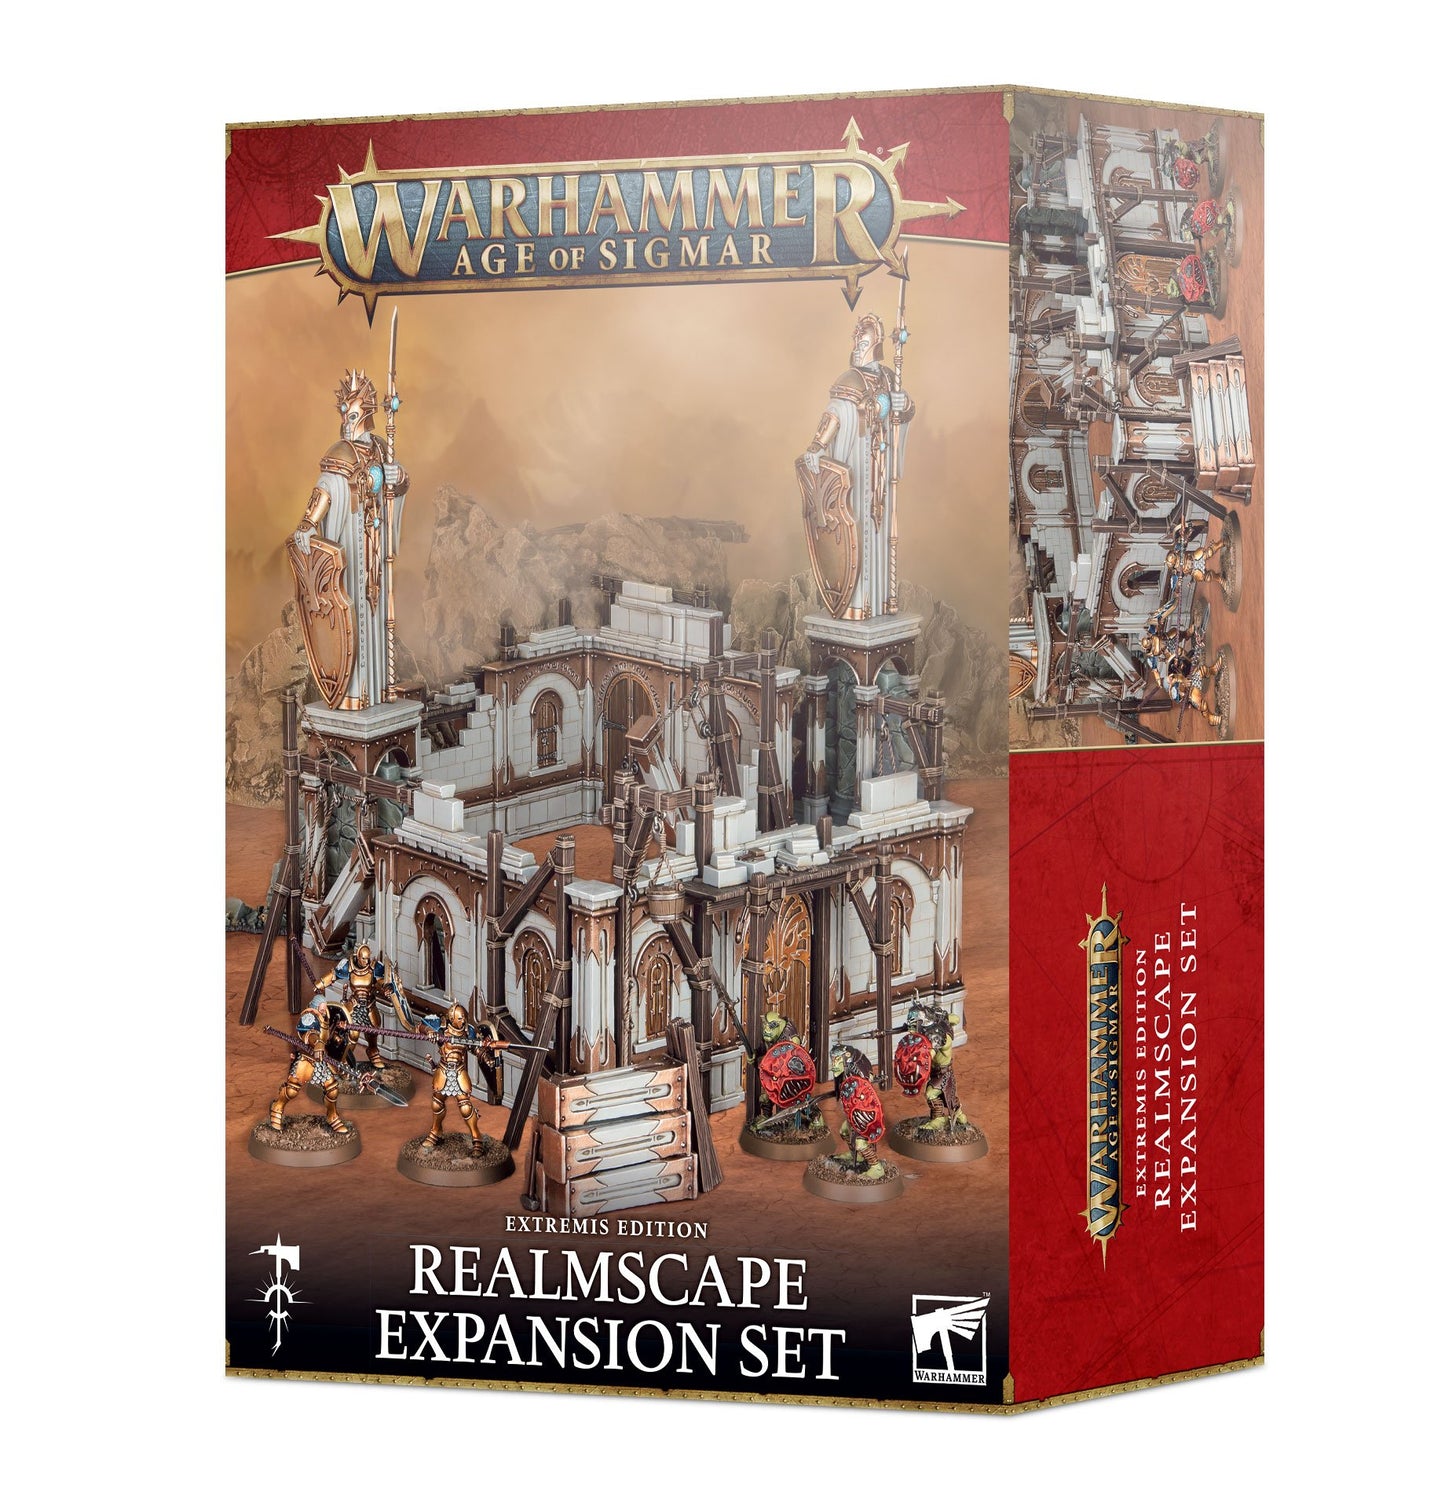 AGE OF SIGMAR: REALMSCAPE EXPANSION